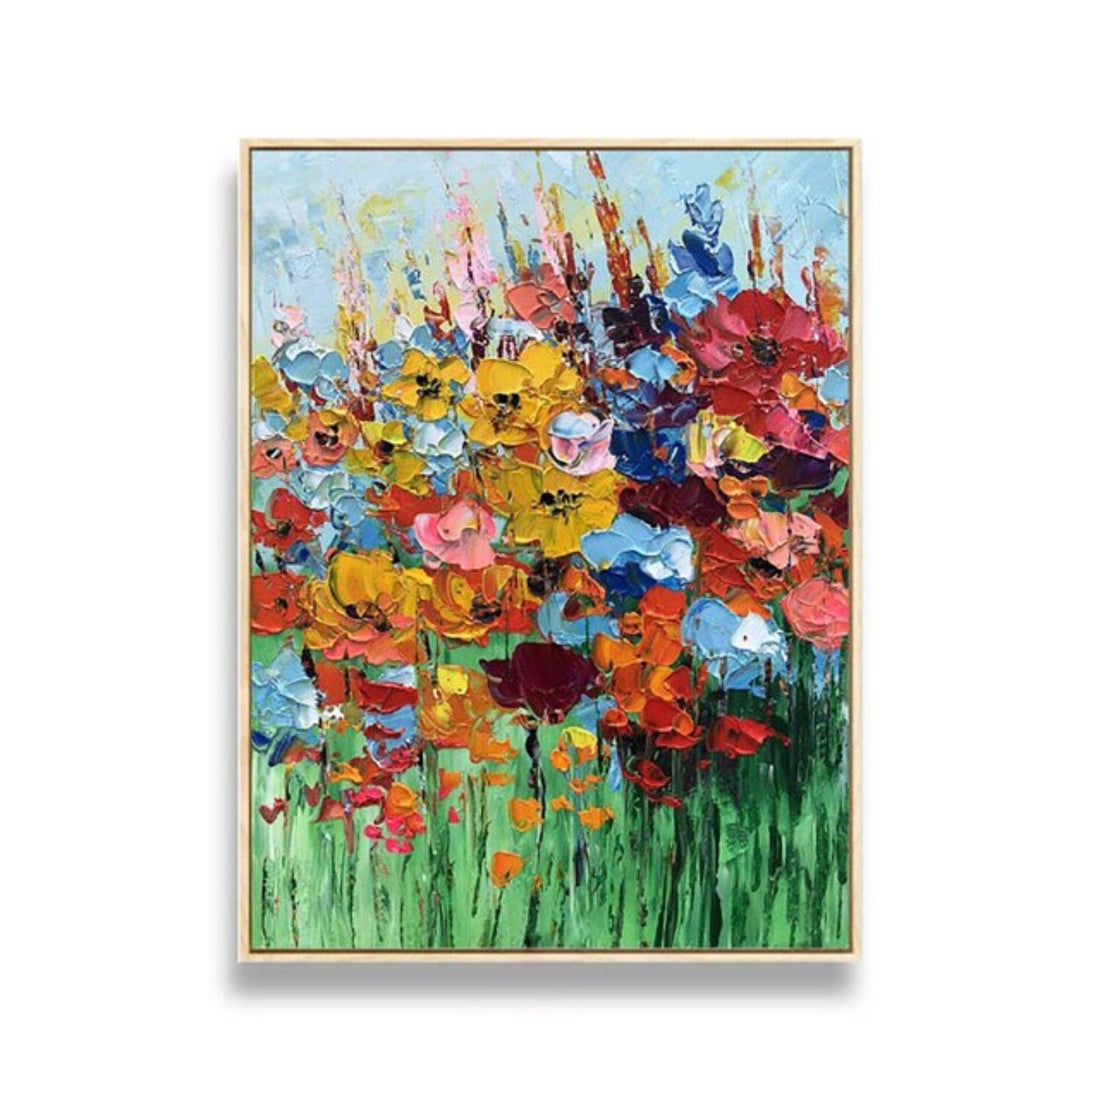 How to Identify Original Textured Flower Paintings?